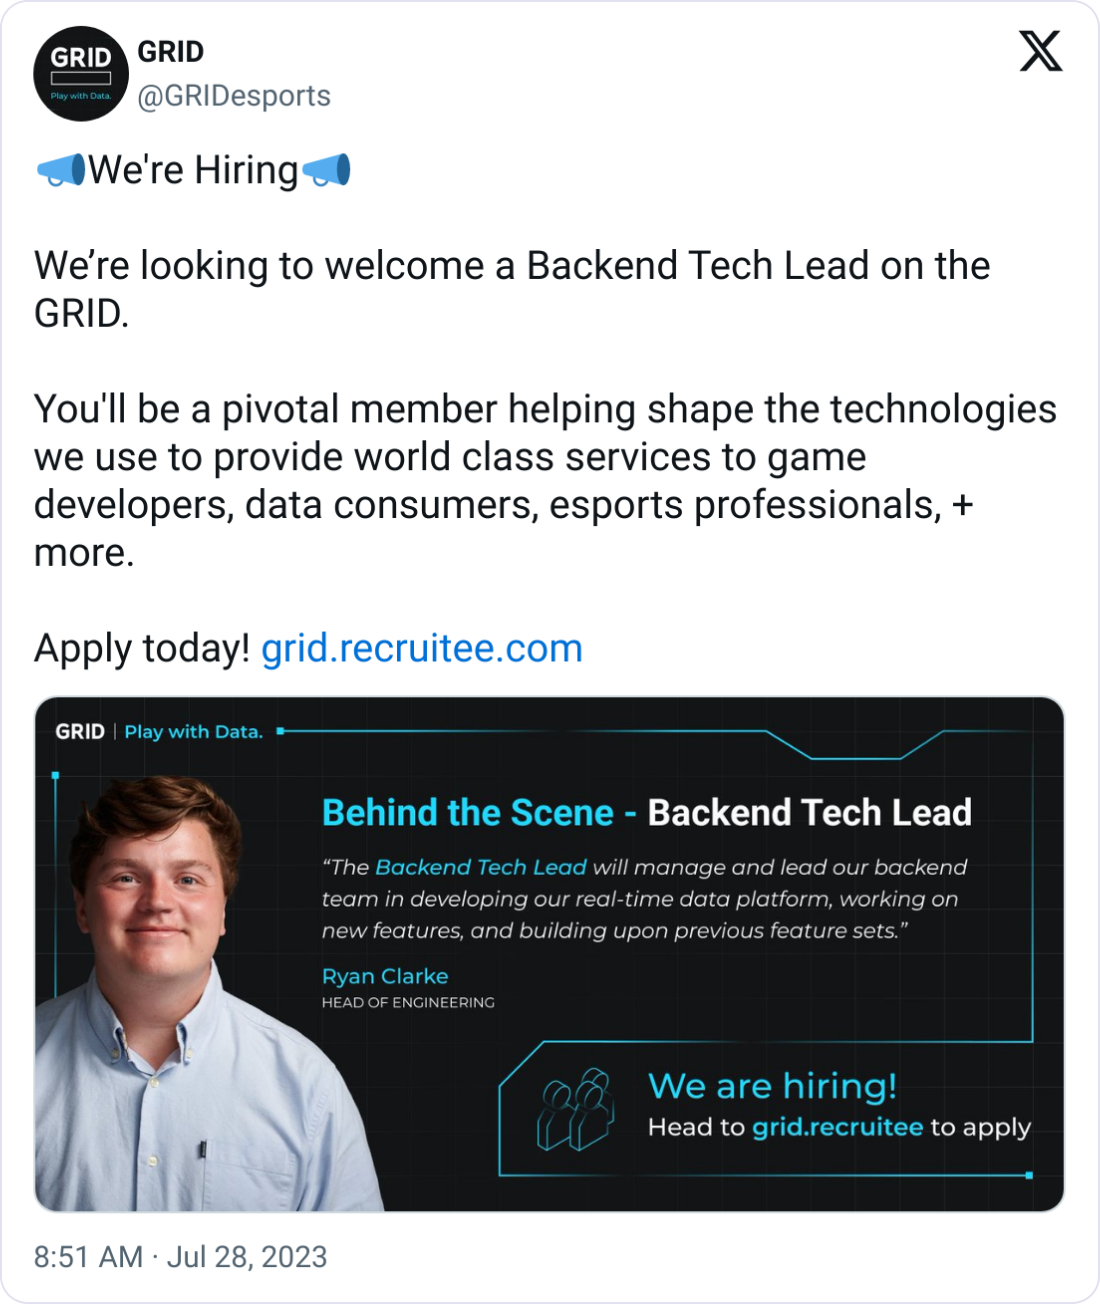 GRID @GRIDesports 📣We're Hiring📣  We’re looking to welcome a Backend Tech Lead on the GRID.  You'll be a pivotal member helping shape the technologies we use to provide world class services to game developers, data consumers, esports professionals, + more.  Apply today! https://grid.recruitee.com